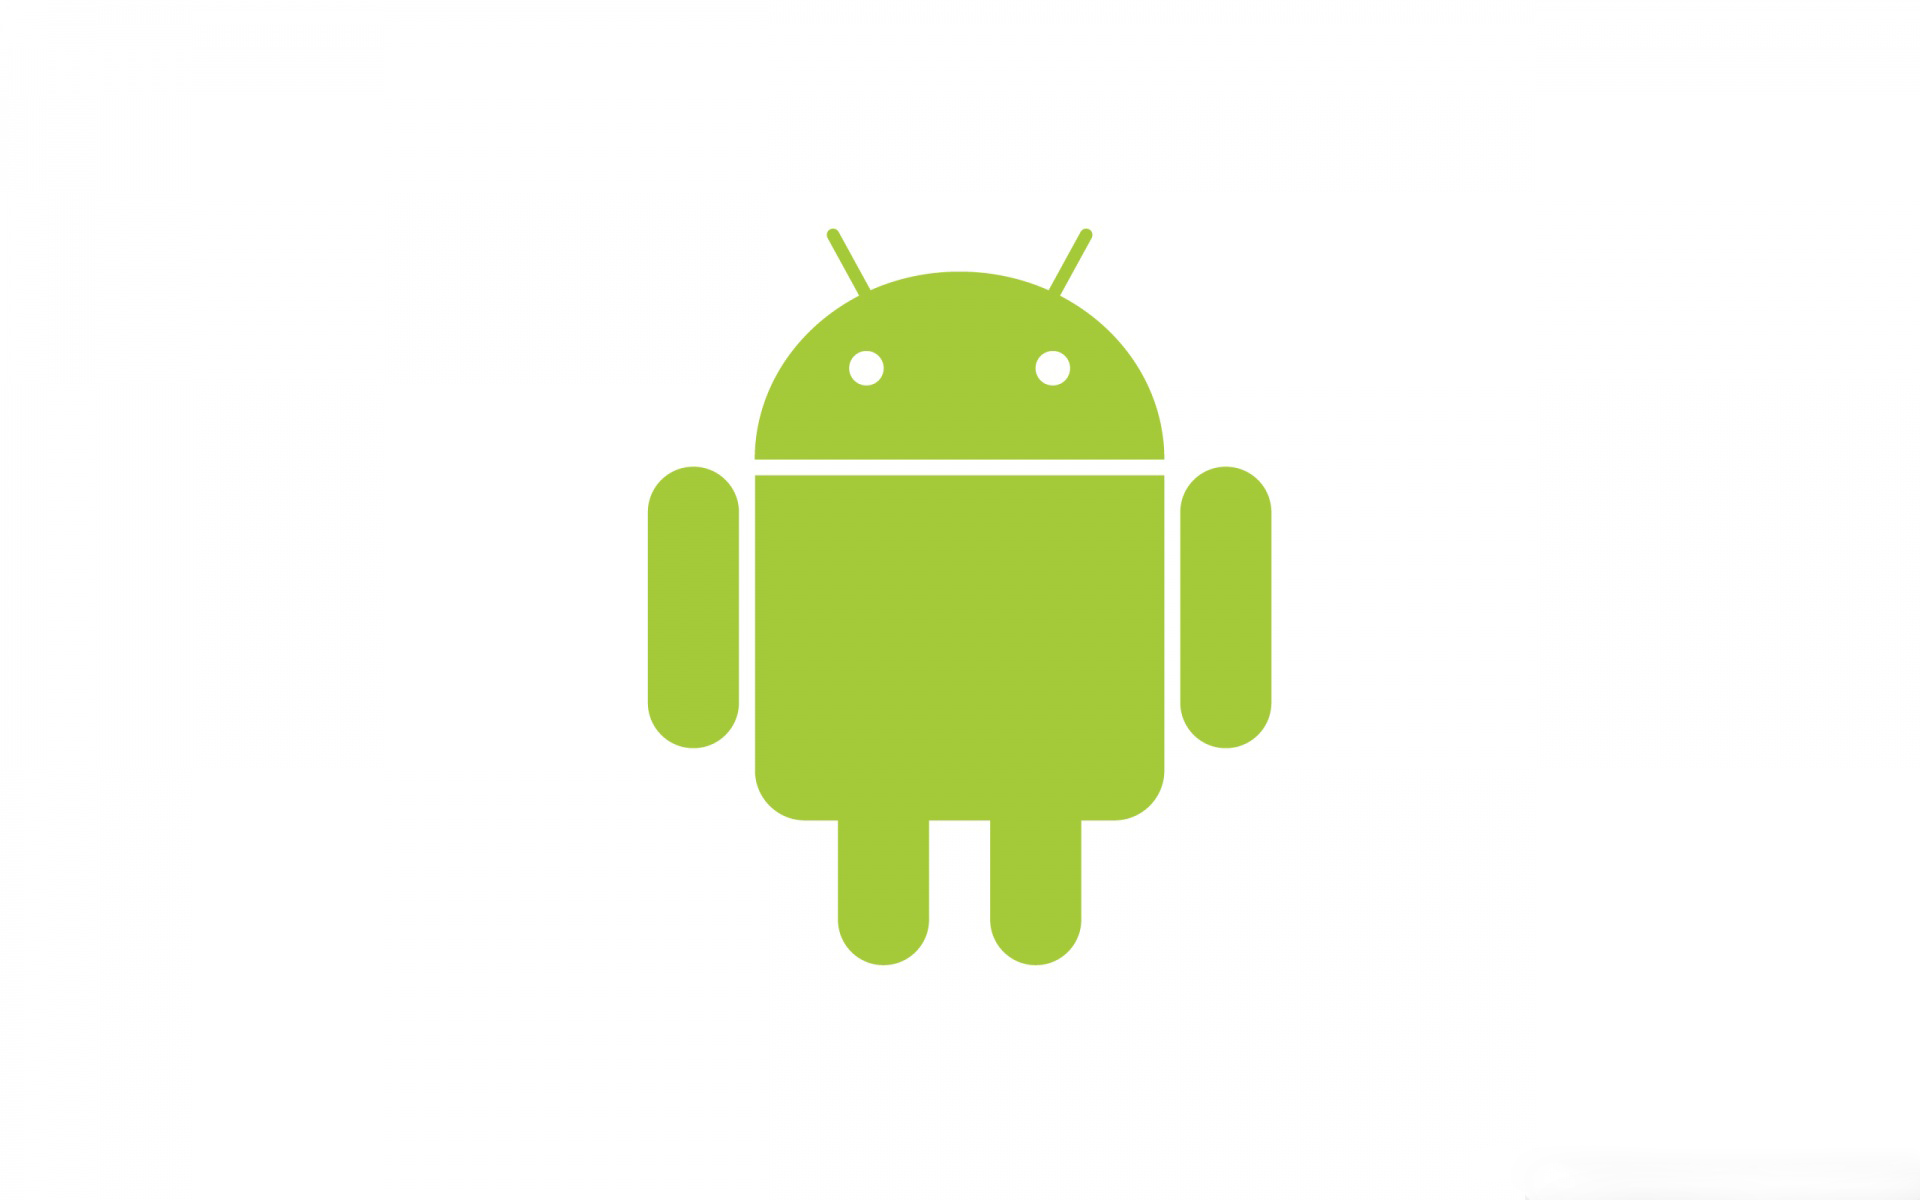 simple wallpaper for android,green,cartoon,logo,technology,illustration